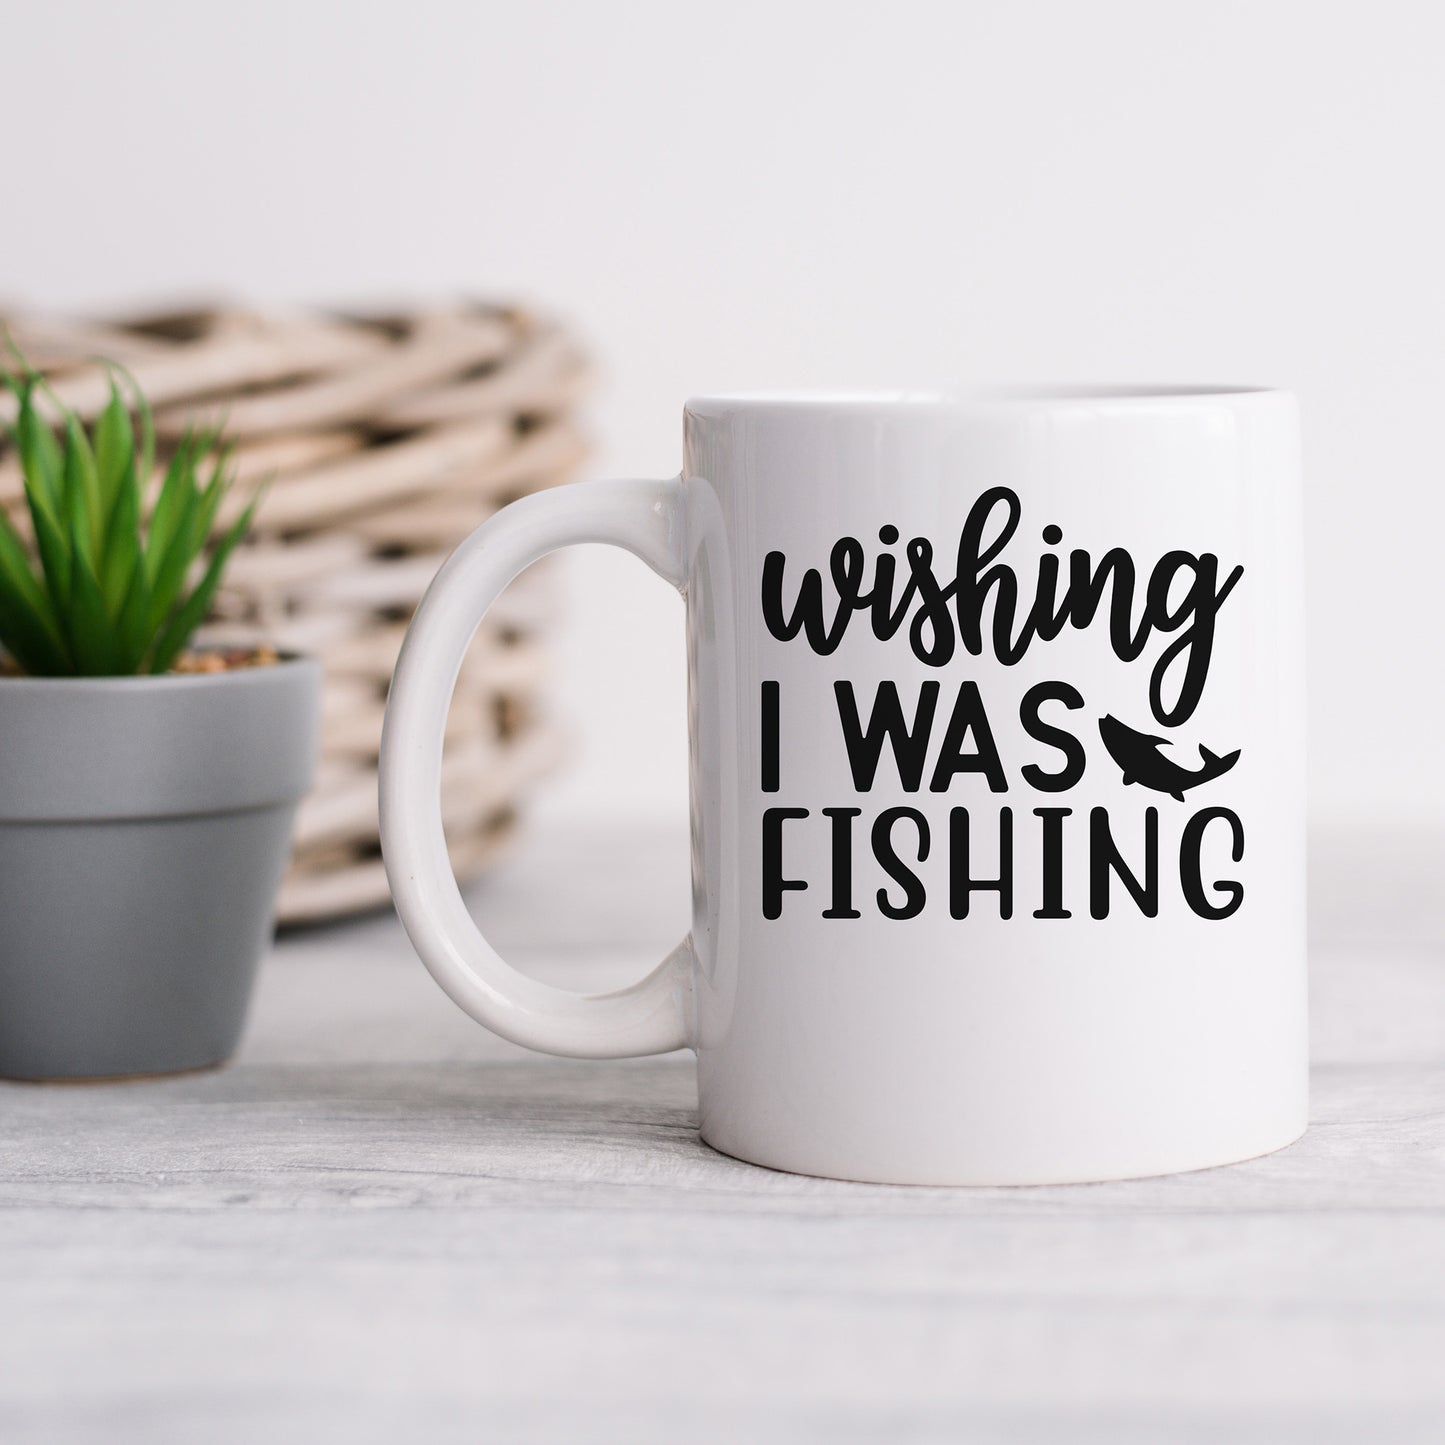 "Wishing I Was Fishing" With Fish Graphic